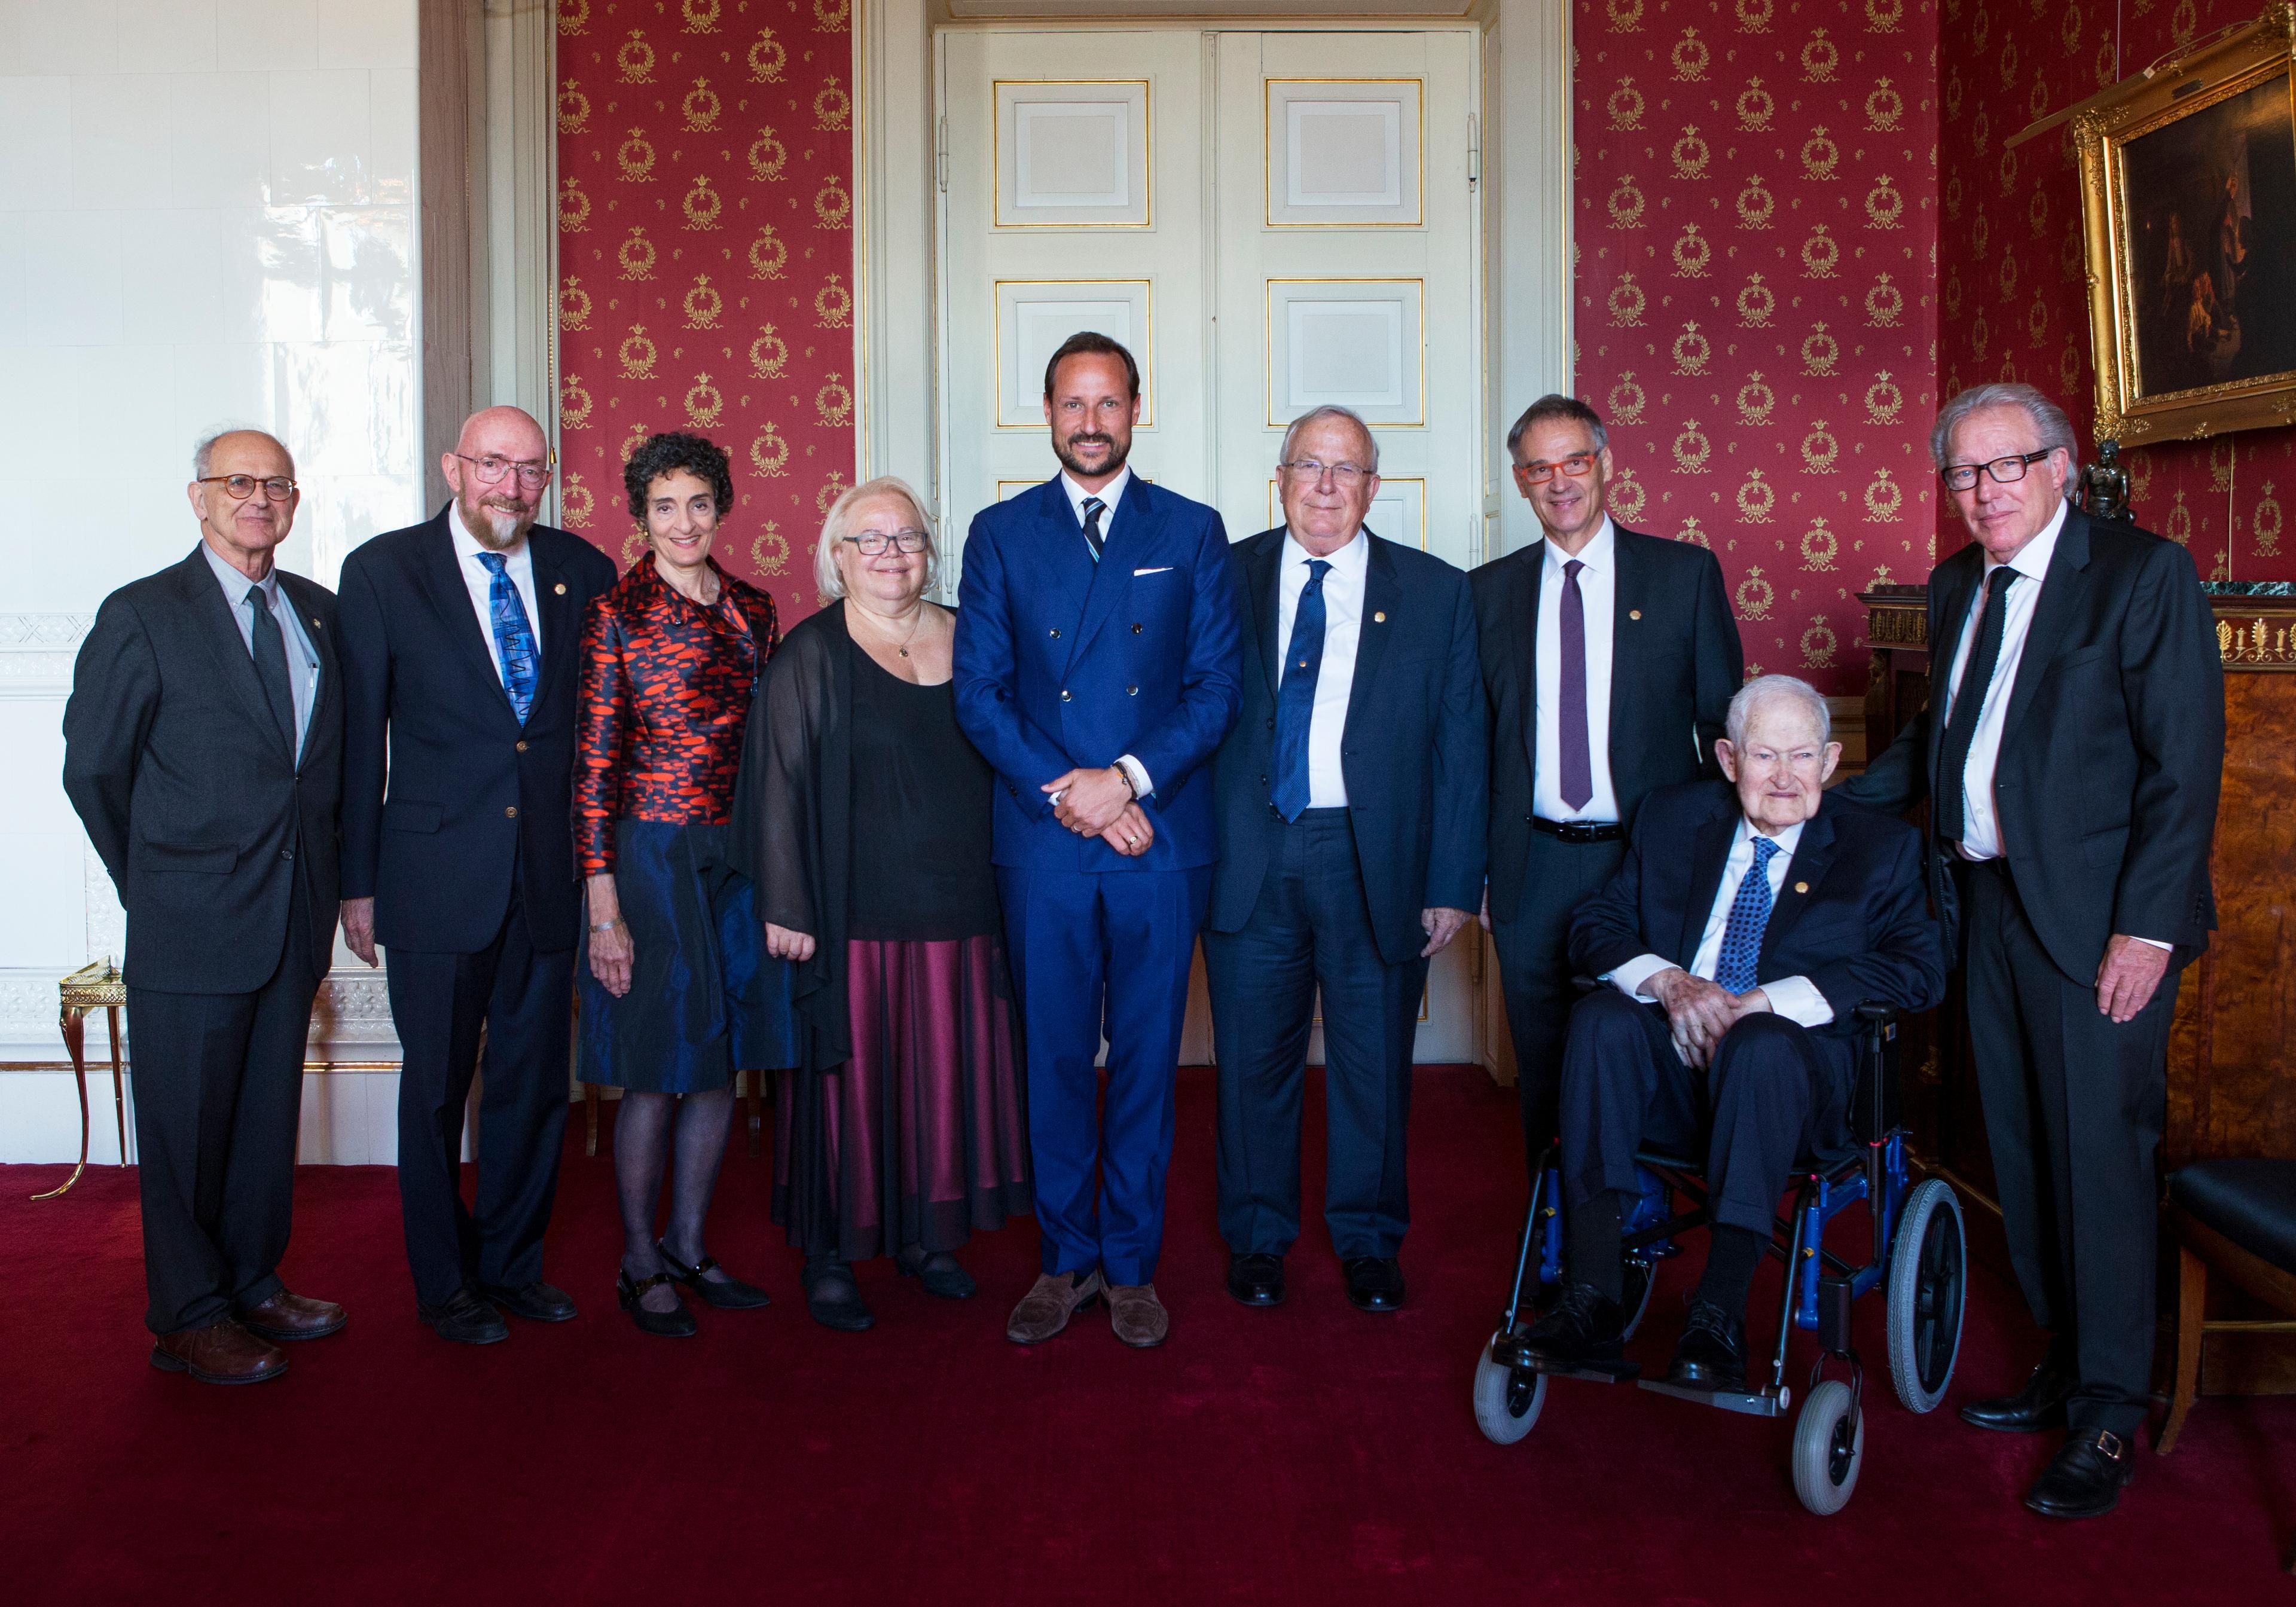 All the 2016 Kavli Prize laureates together with His Royal Highness Crown Prince Haakon at the prize ceremony in Oslo. 